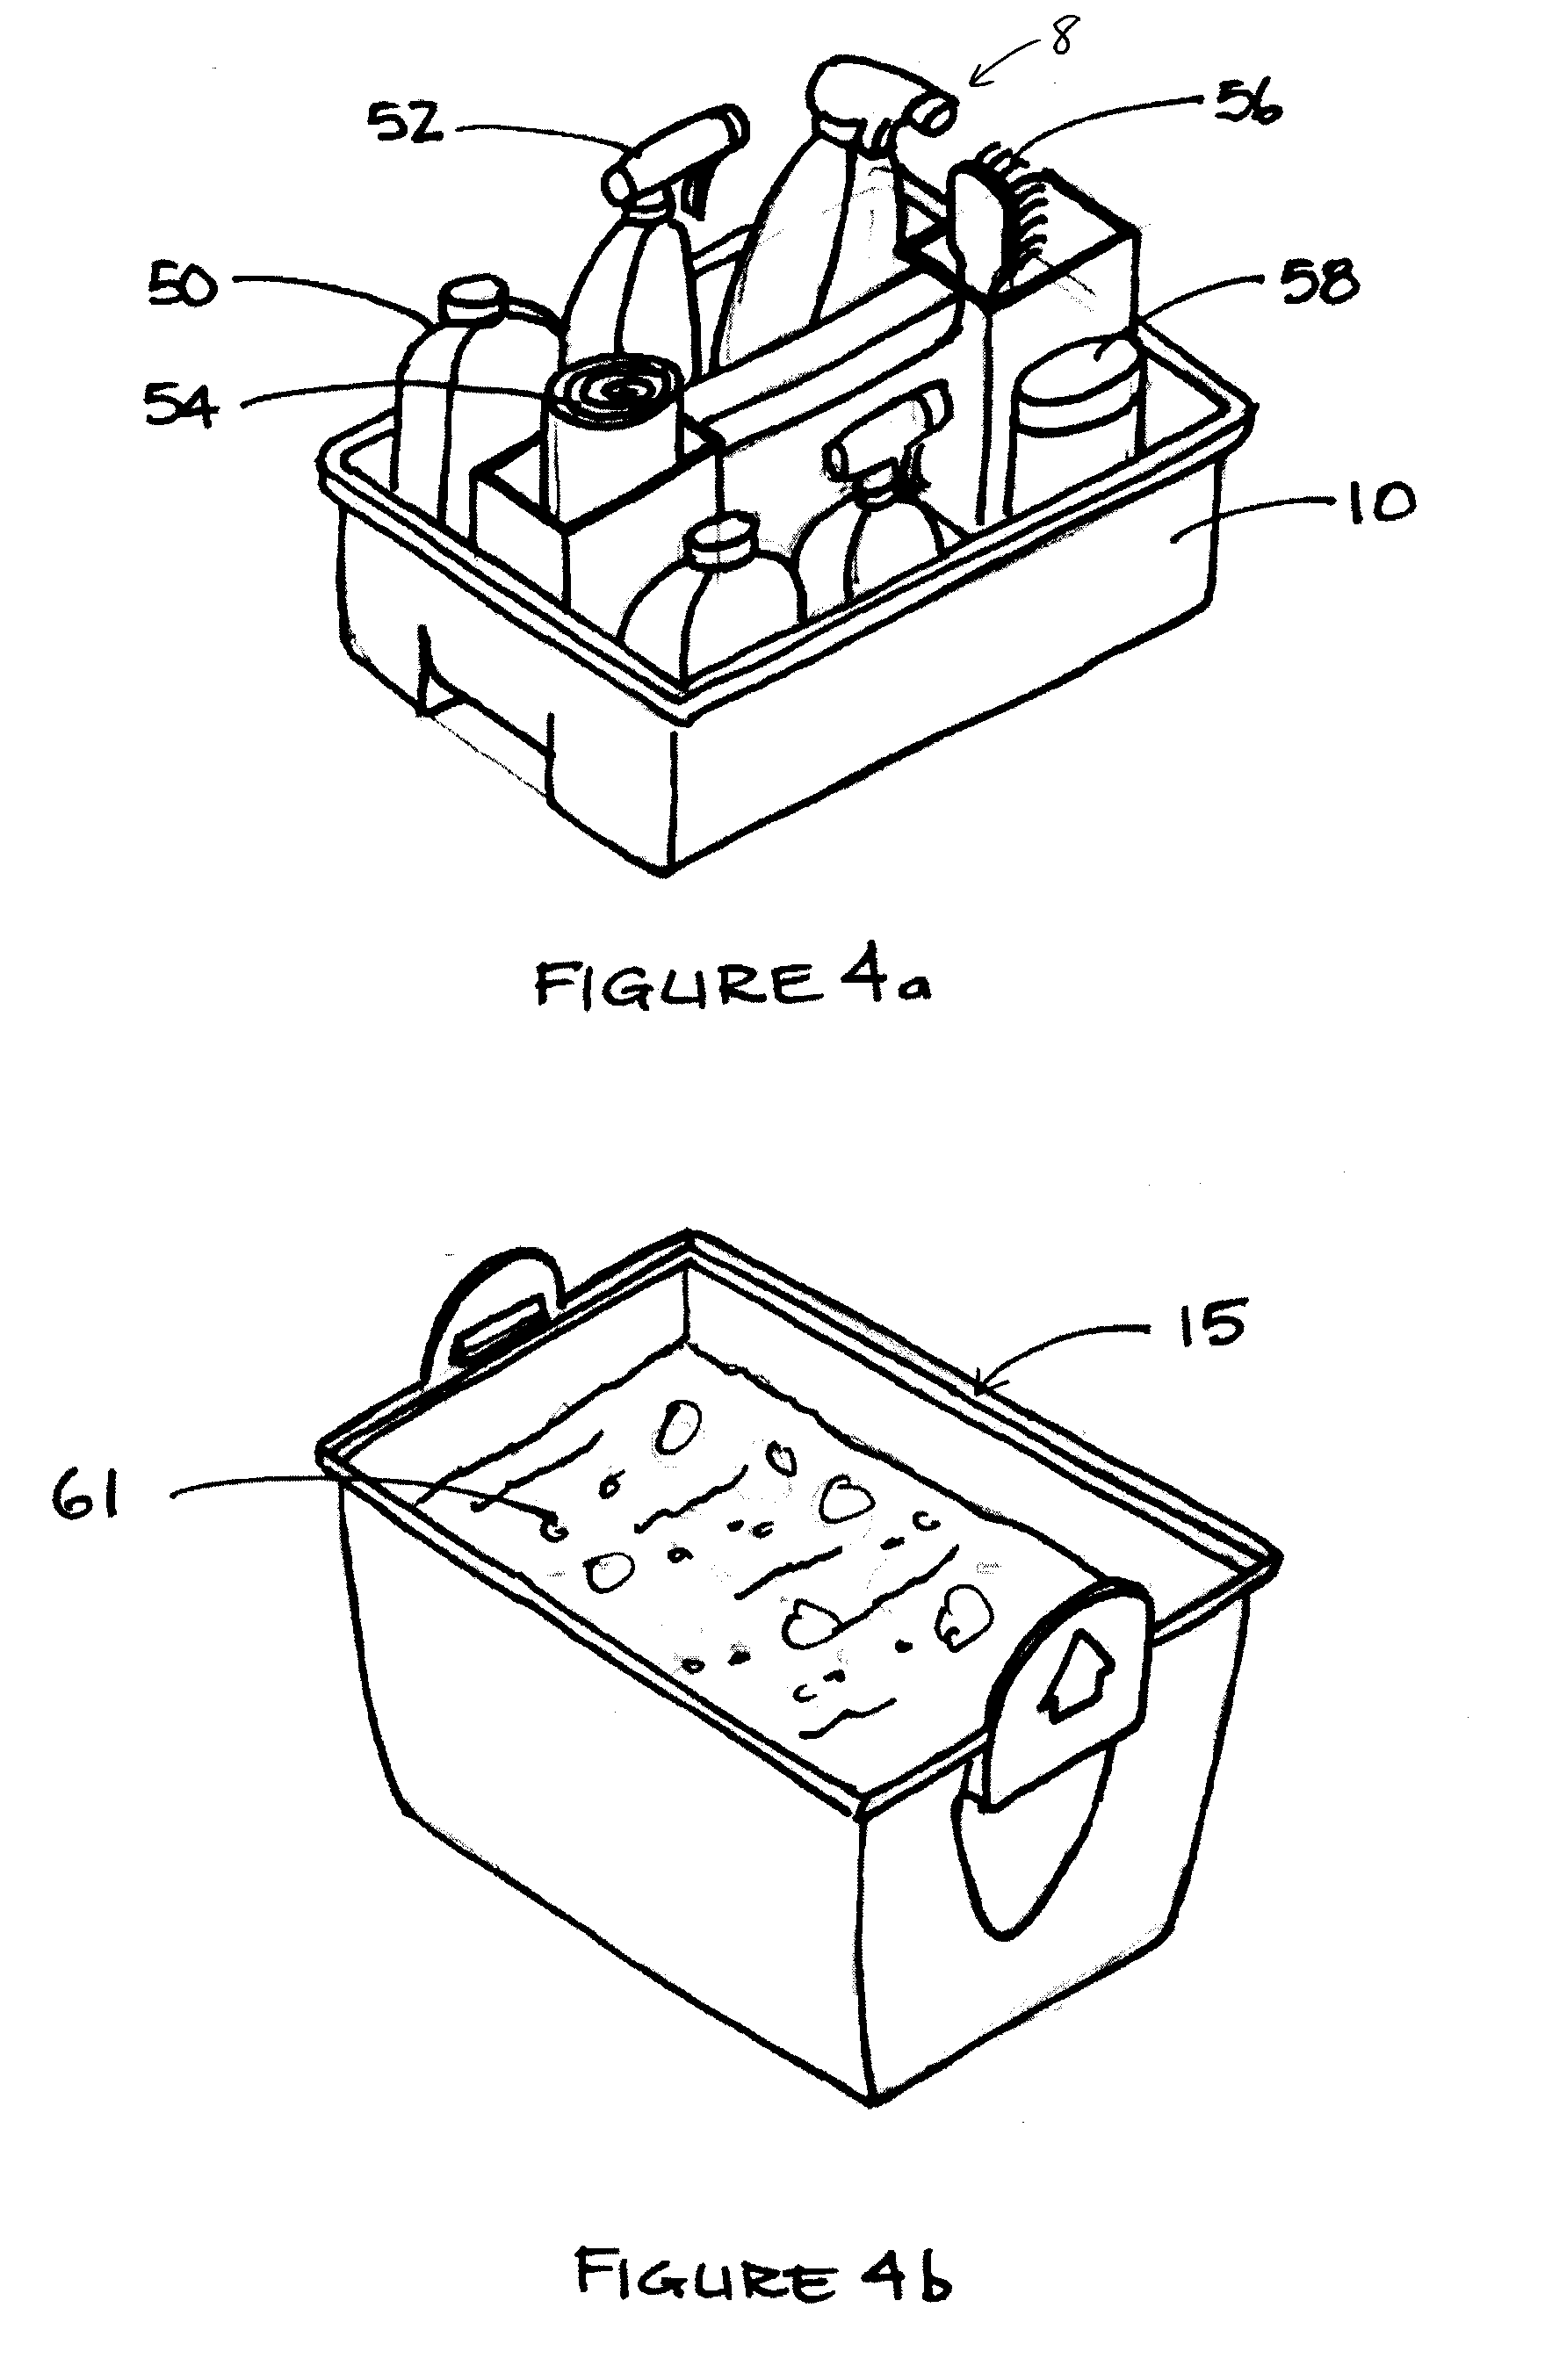     Patent Us20100133132   Cleaning Supplies Caddy   Google Patents